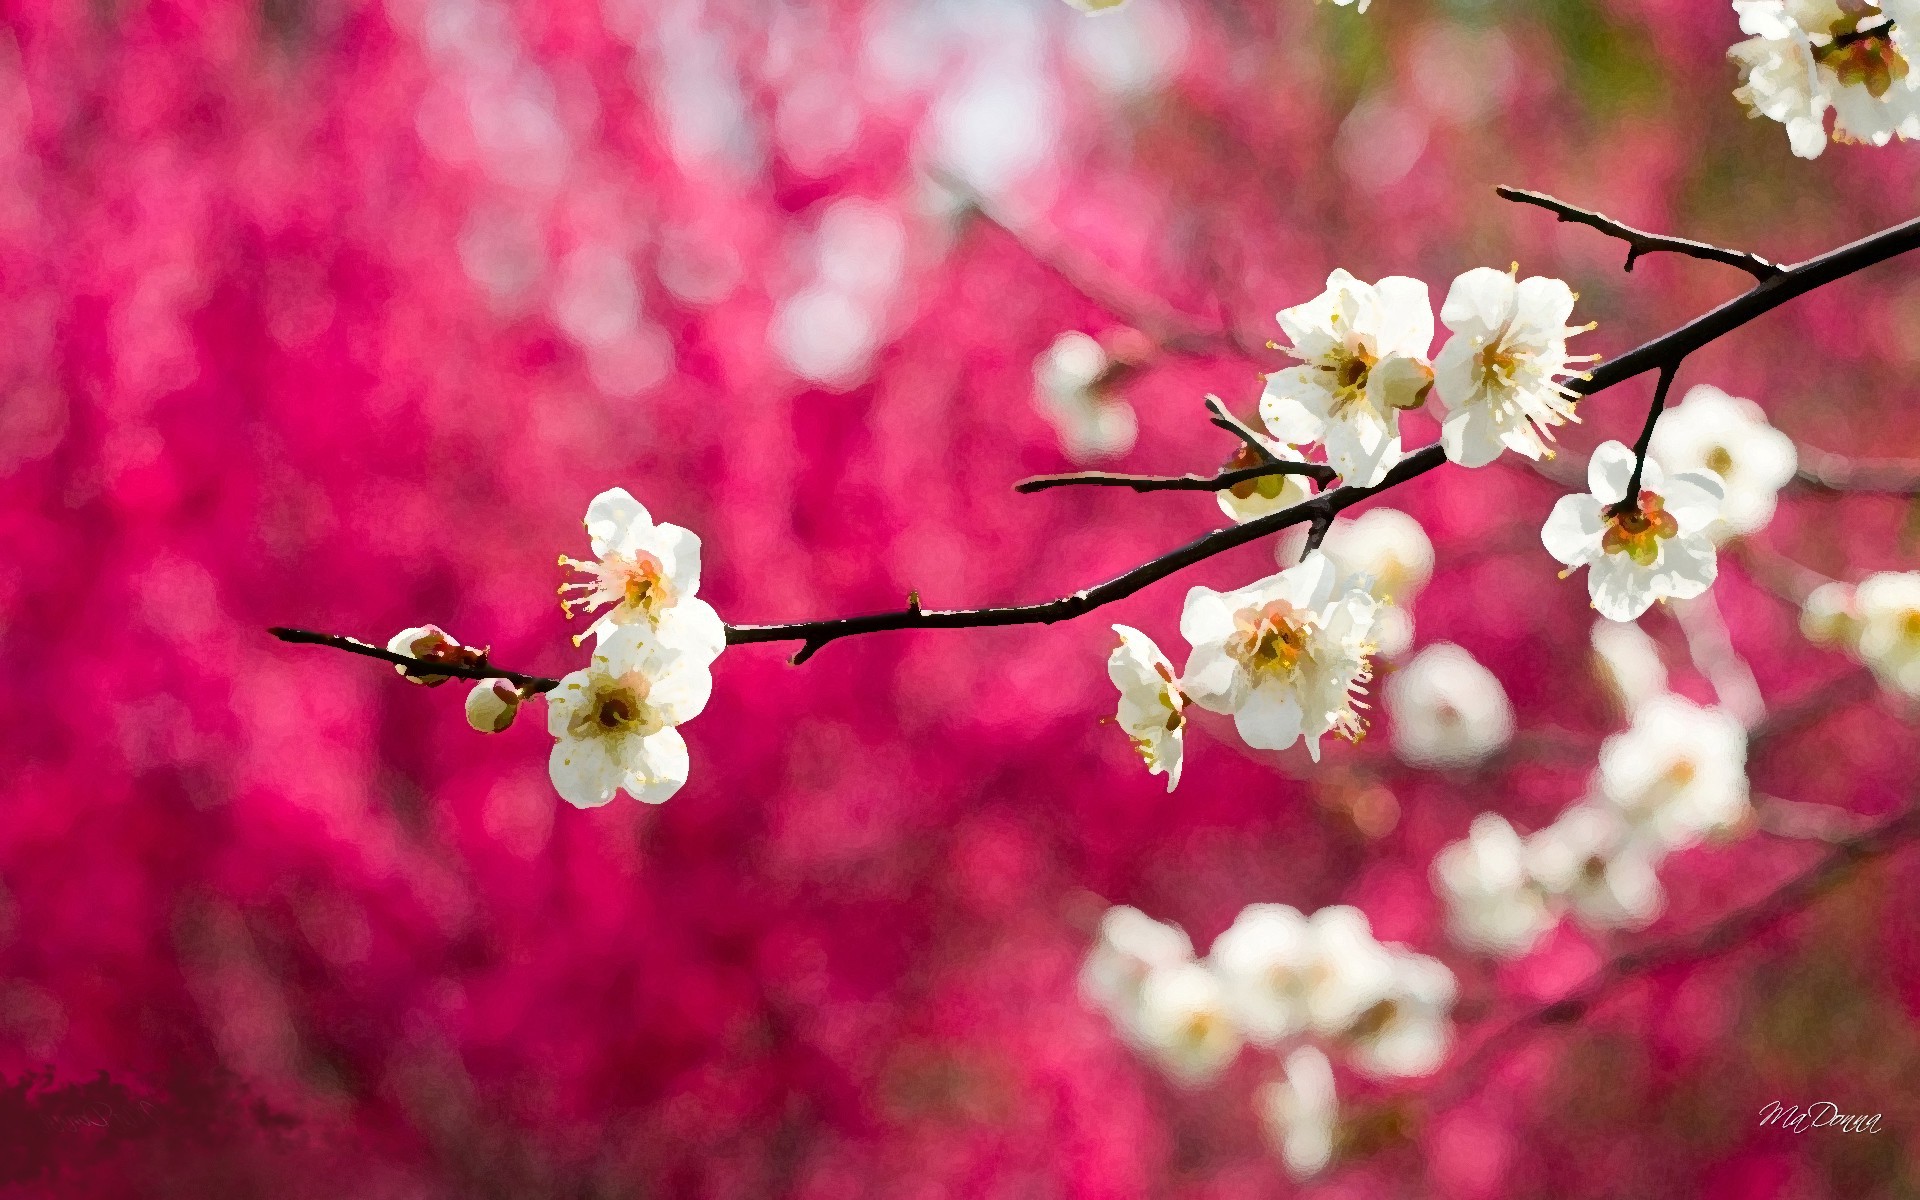 Painted Cherry Blossoms Wide Desktop Background